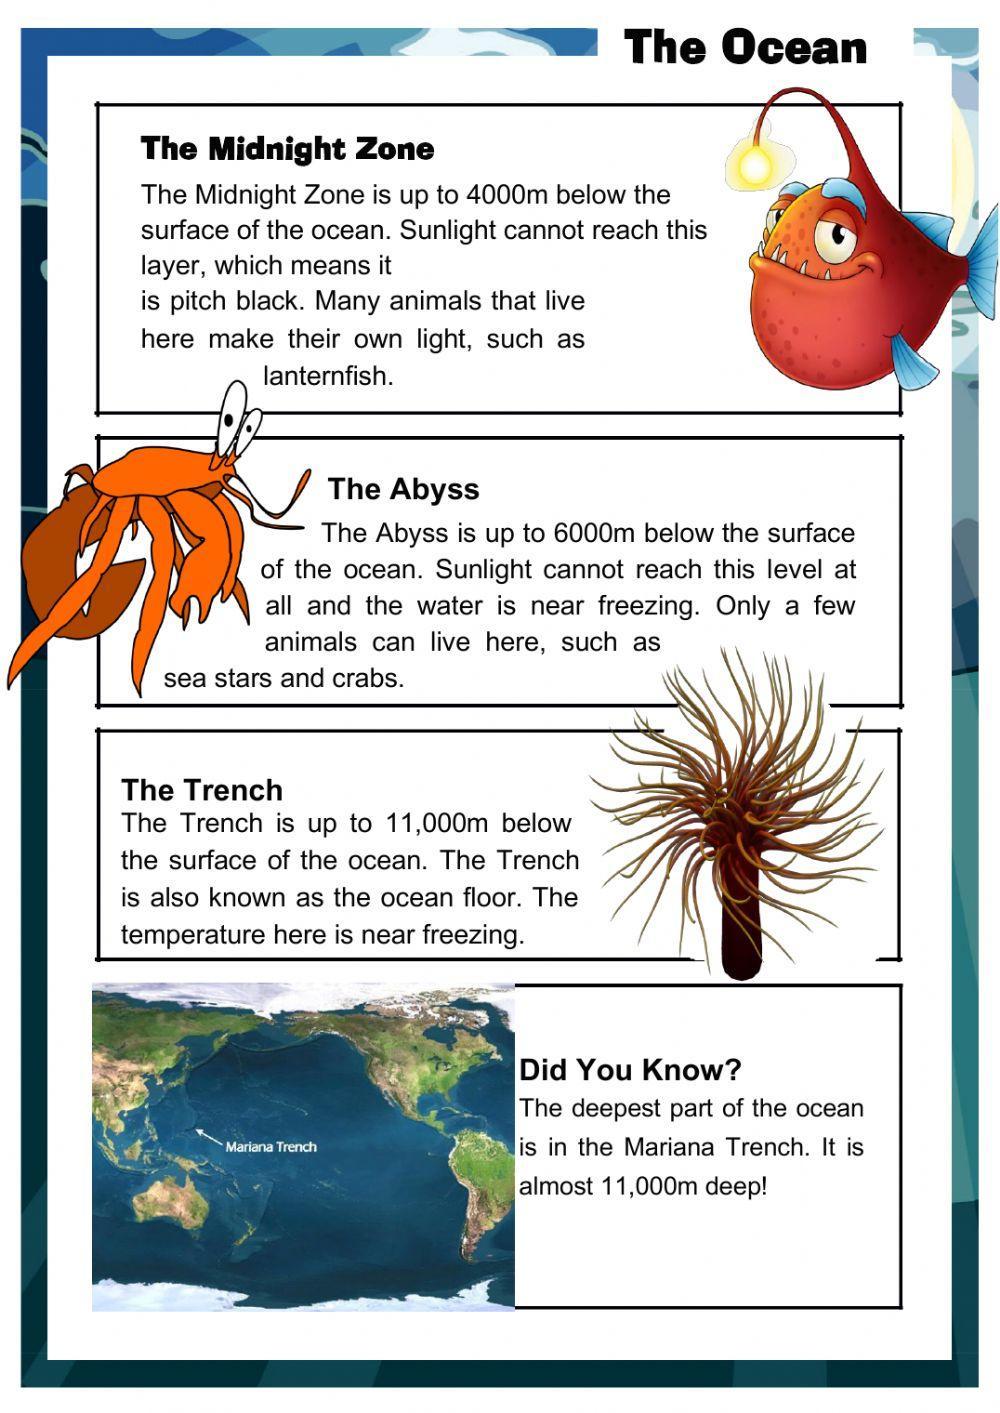 The Ocean (Reading Comprehension)